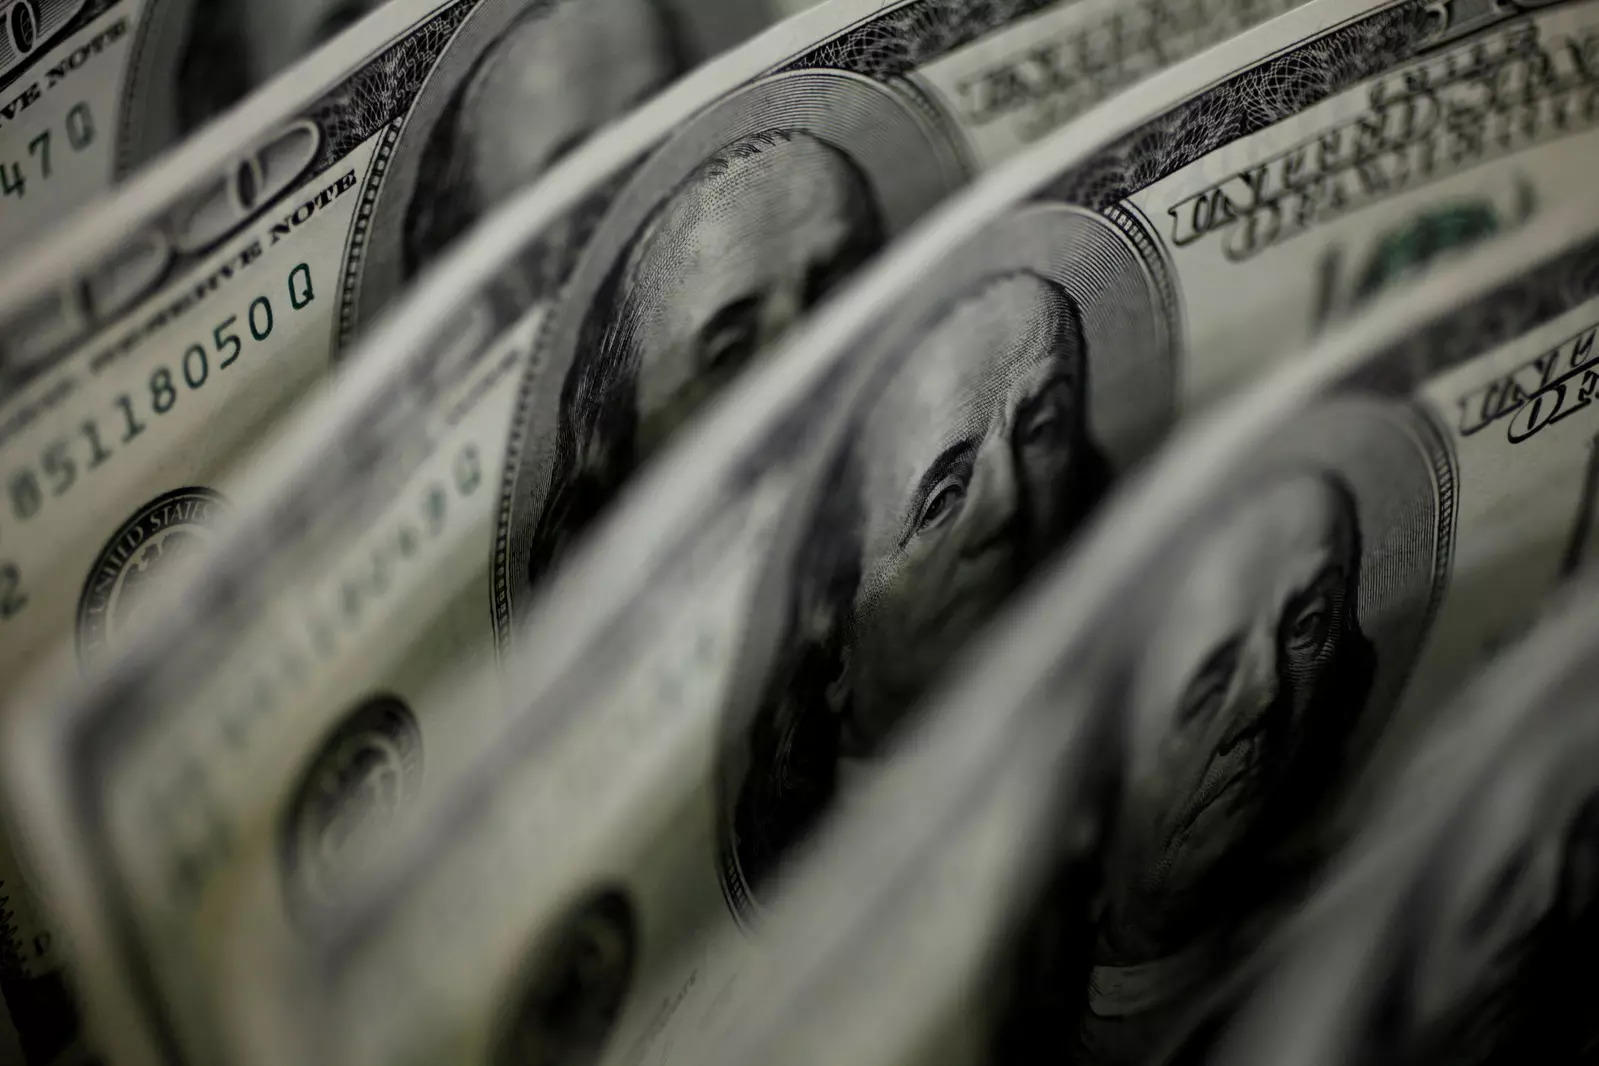 The dollar has been subdued on uncertainty over the path of Fed policy.